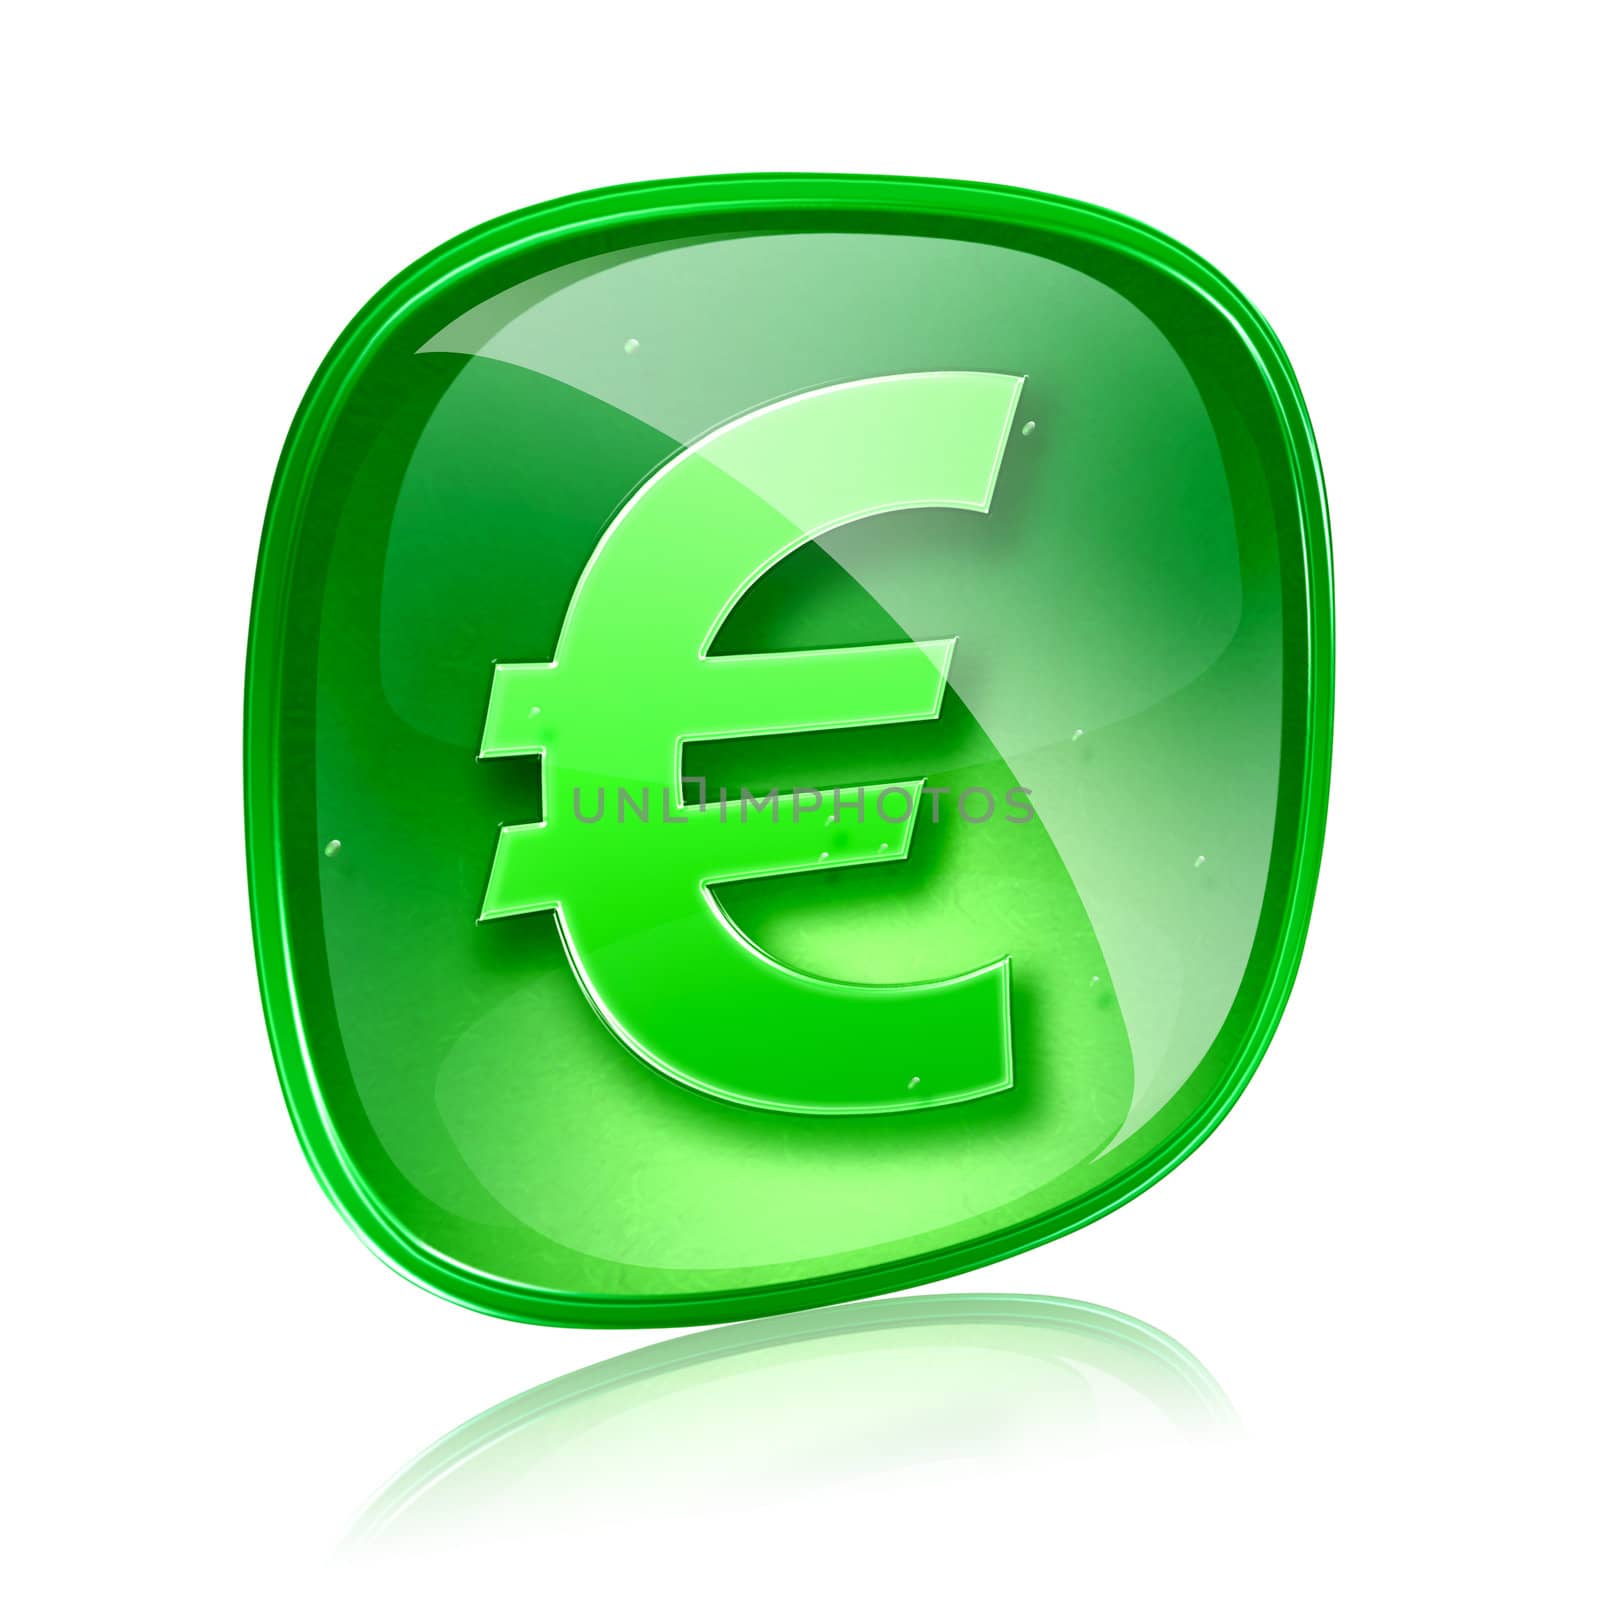 Euro icon green glass, isolated on white background